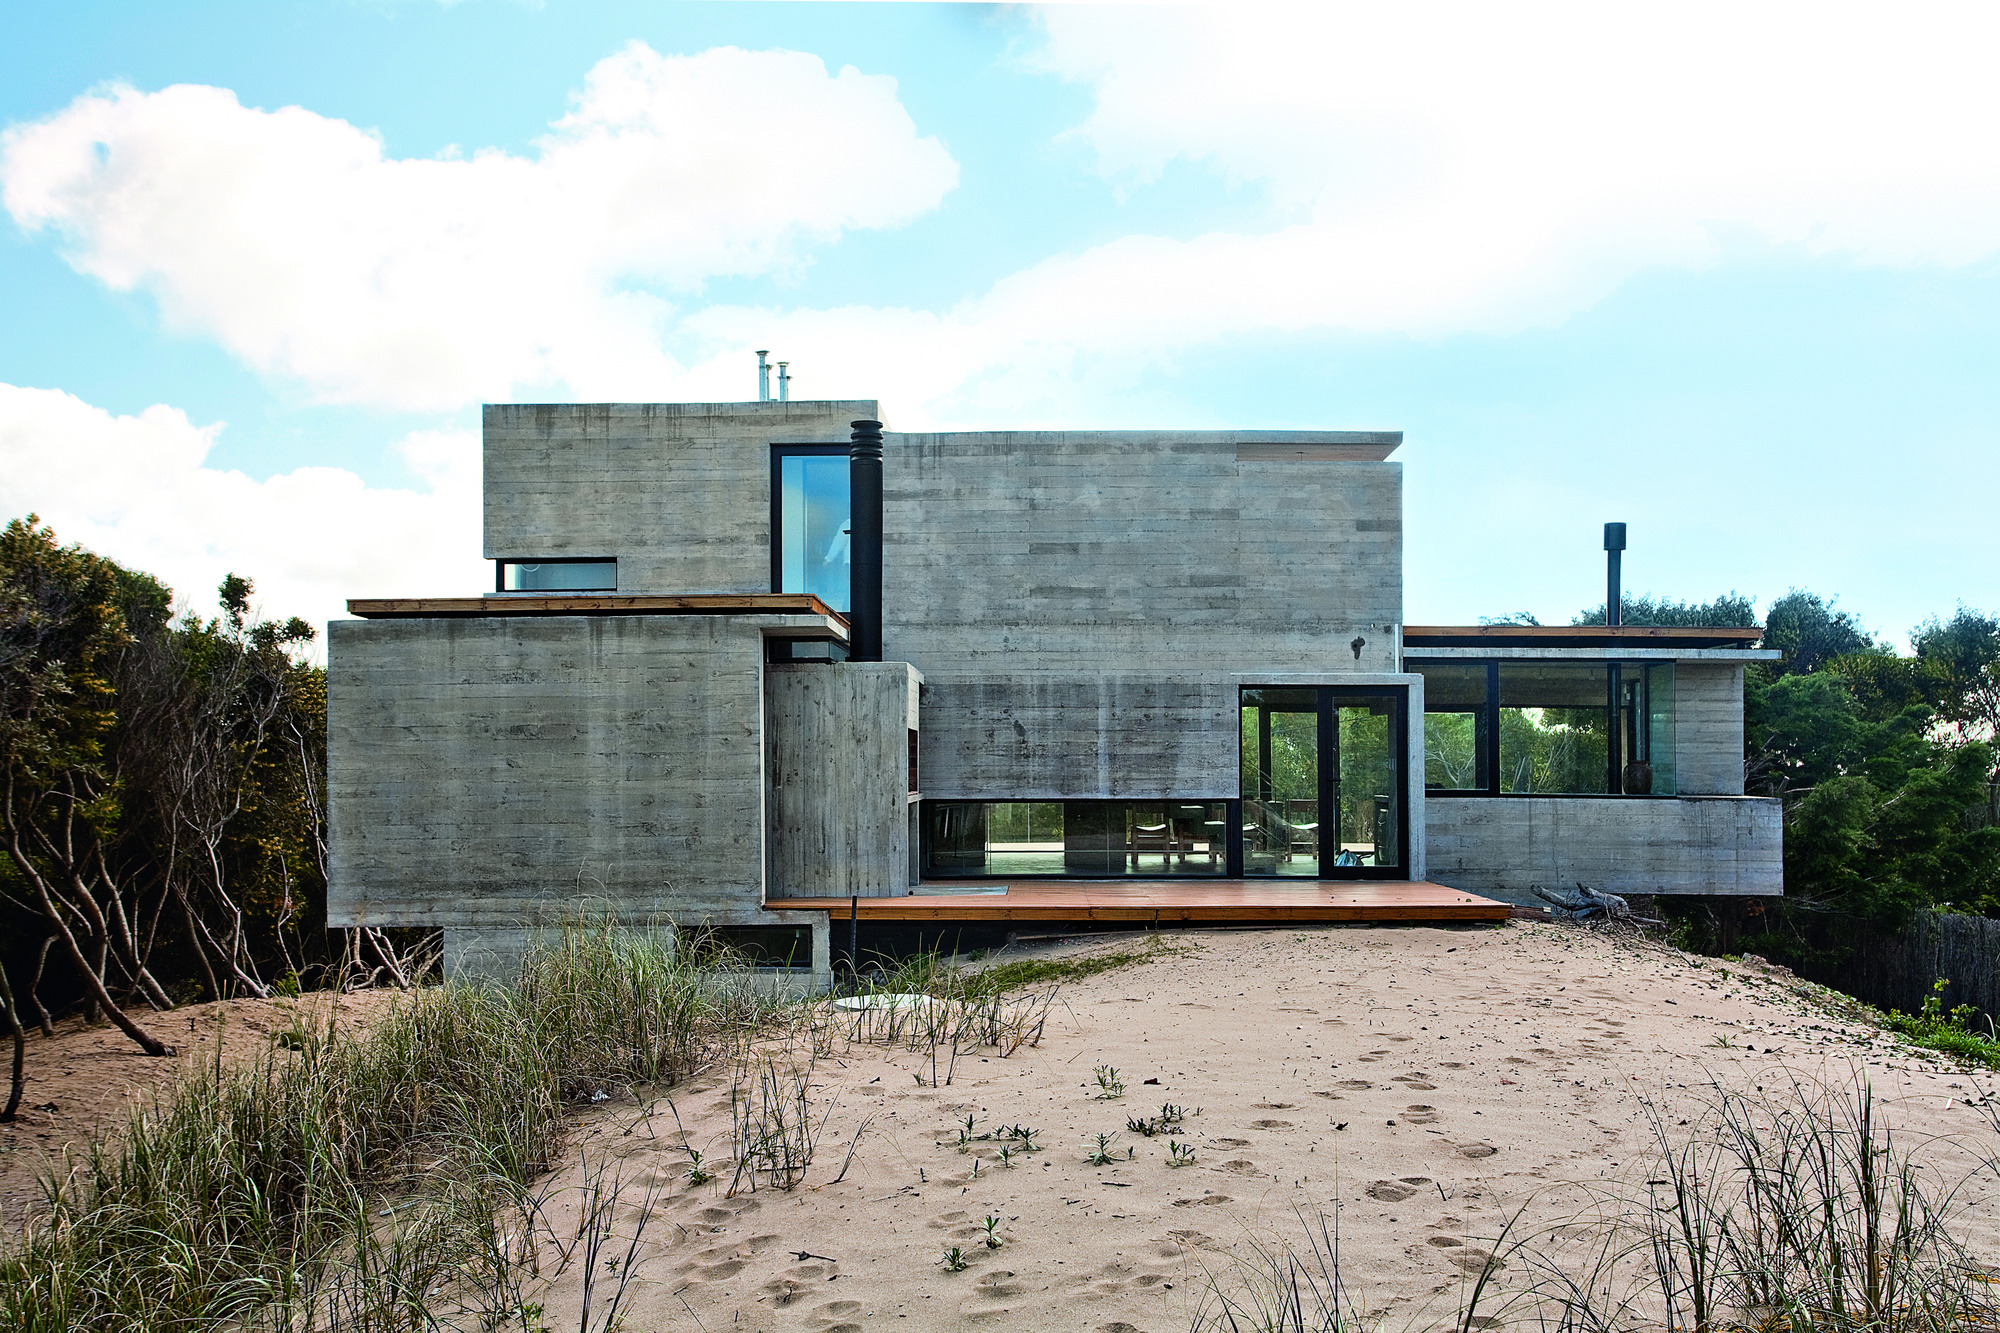 Bare Grey Concrete Home Archtecture For Two Story Design. Part of ...